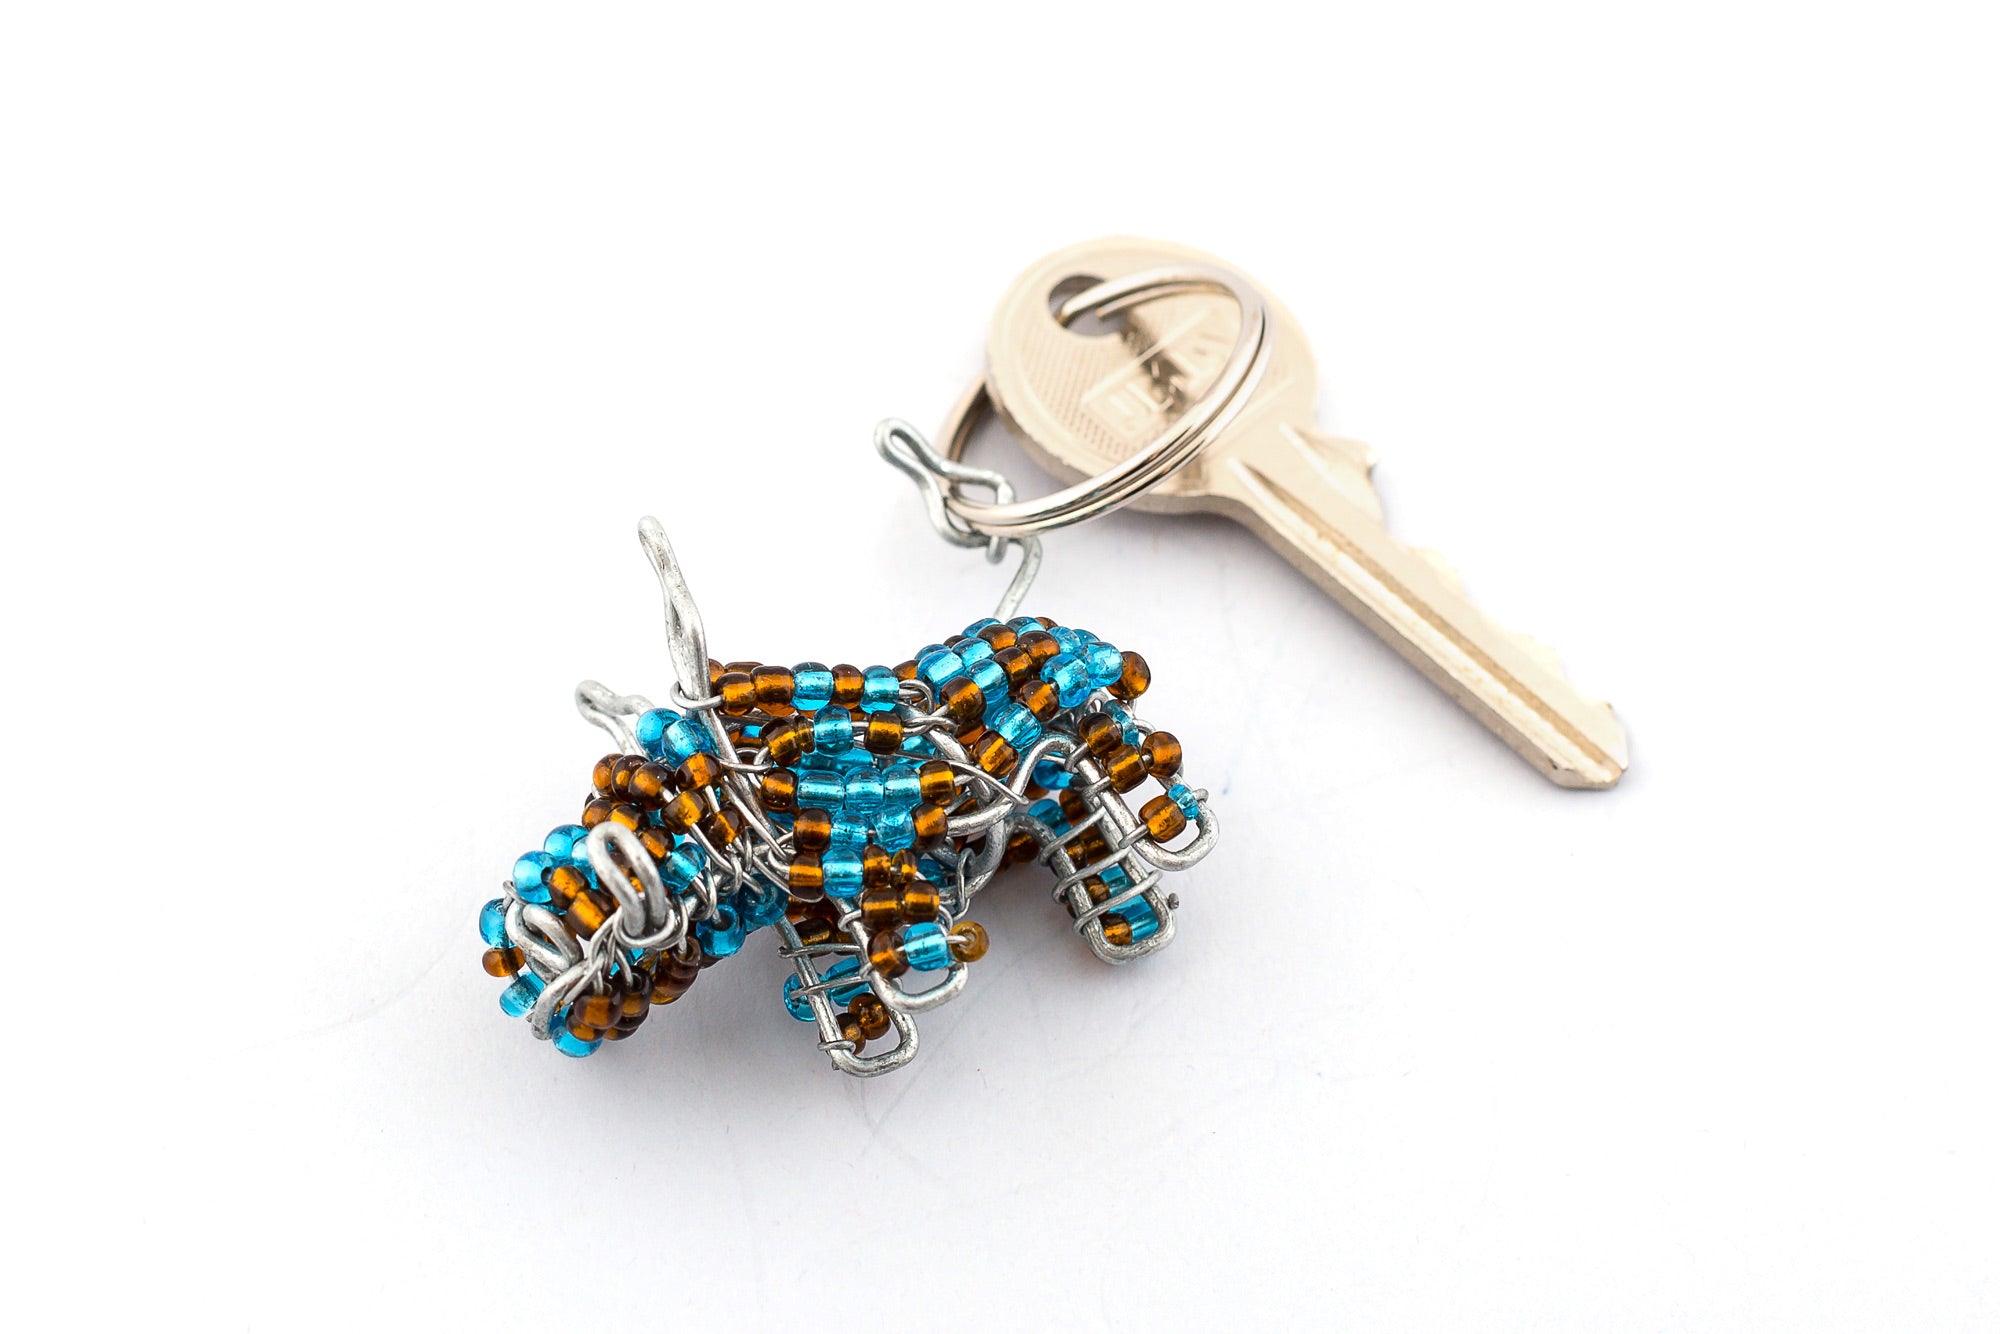 Adorable beaded warthog key chain.  Handmade with turquoise & brown beads.  Fair trade products.